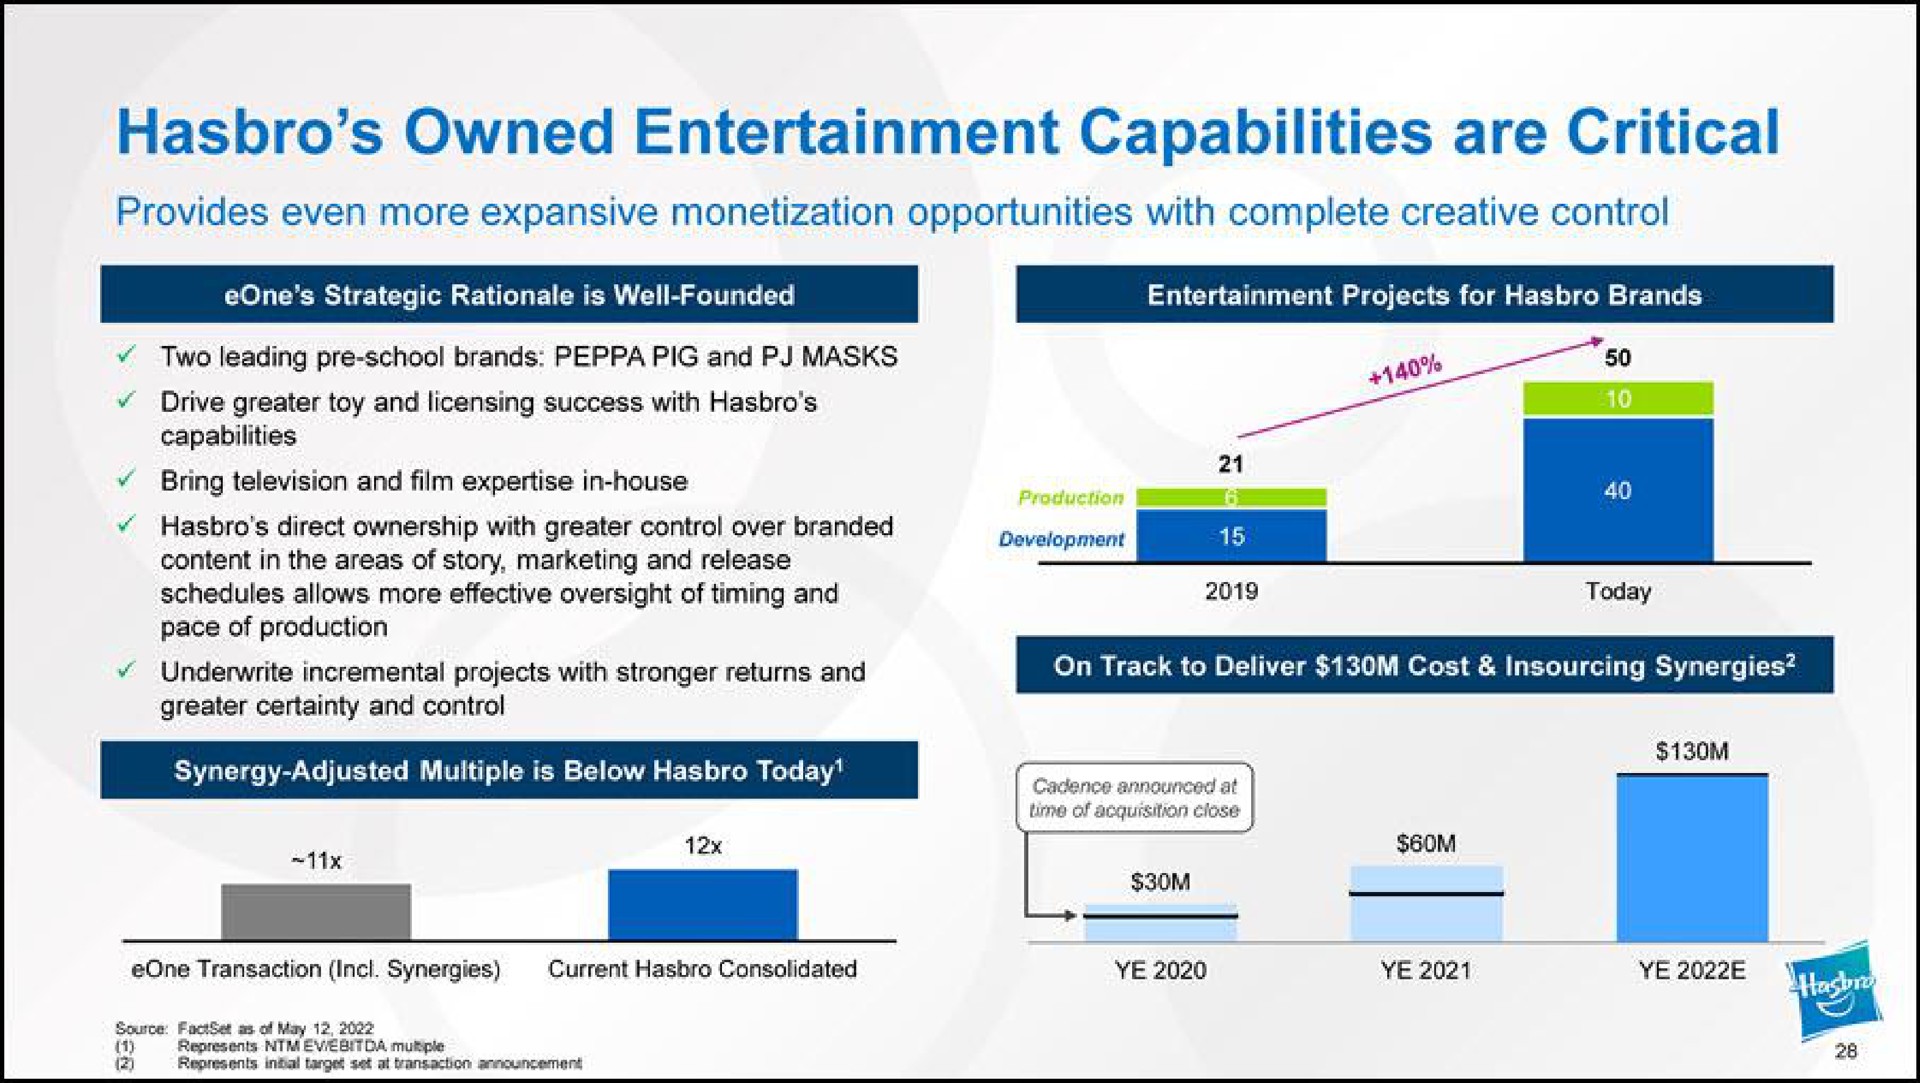 owned entertainment capabilities are critical provides even more expansive monetization opportunities with complete creative control | Hasbro